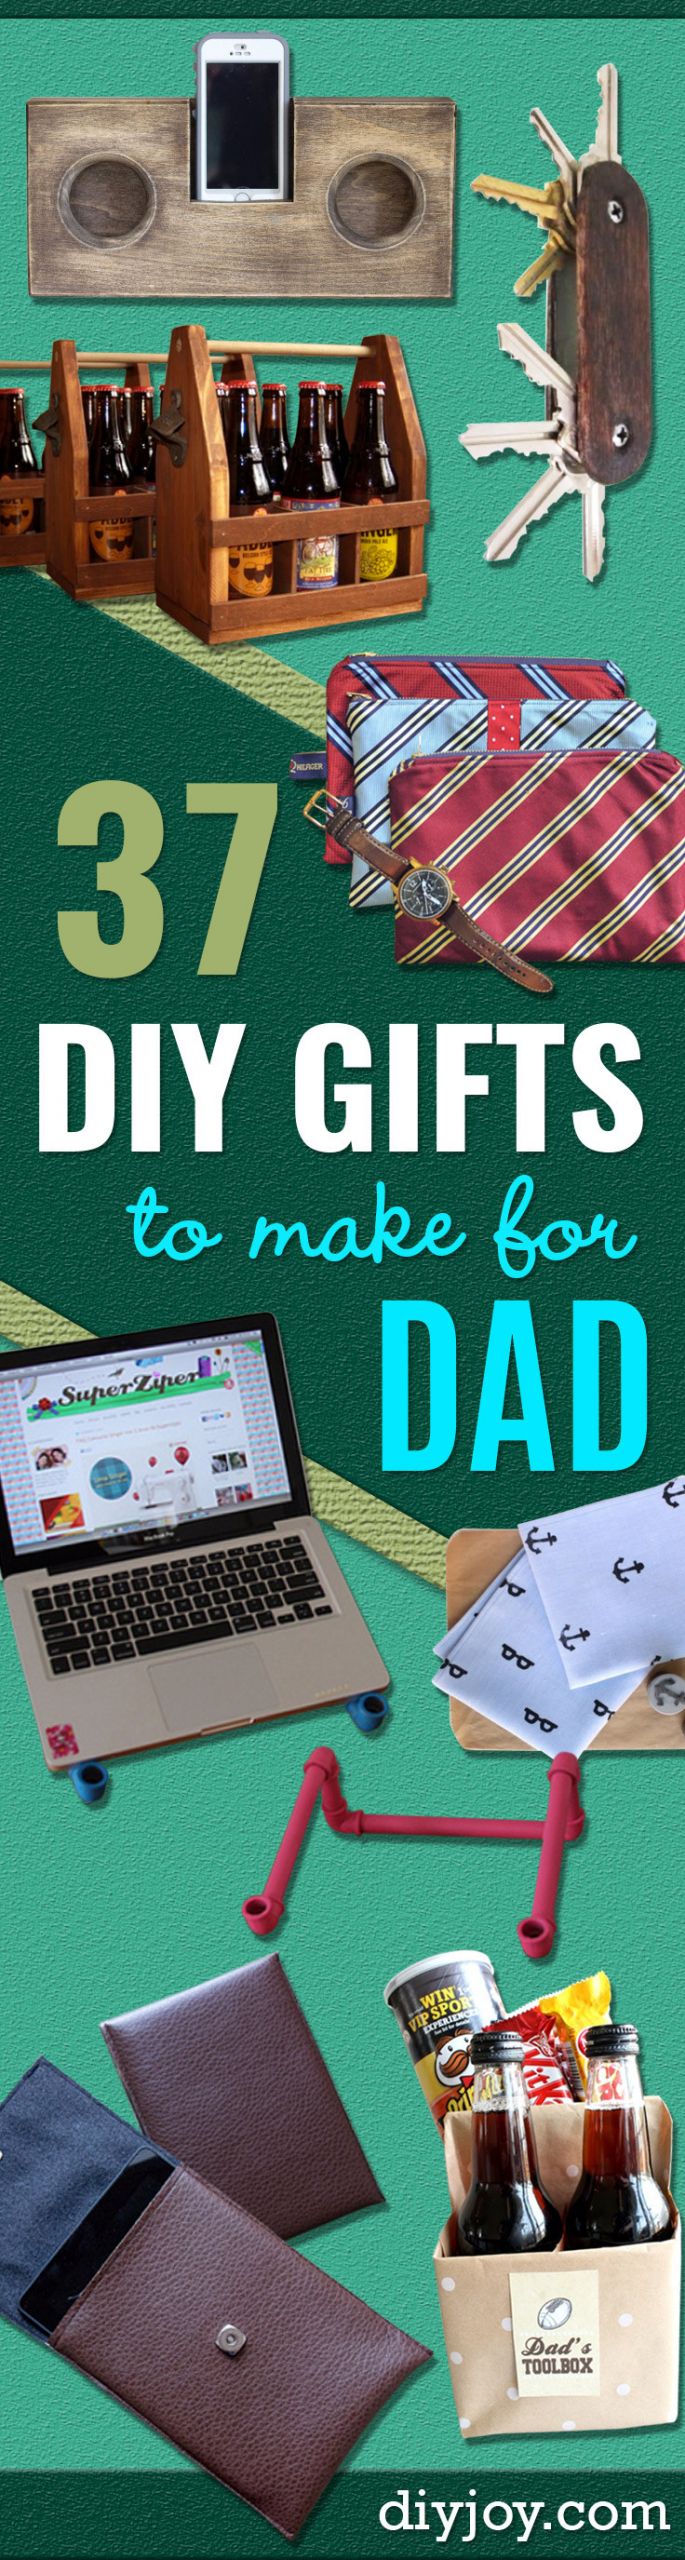 DIY Dads Birthday Gifts
 37 Awesome DIY Gifts to Make for Dad